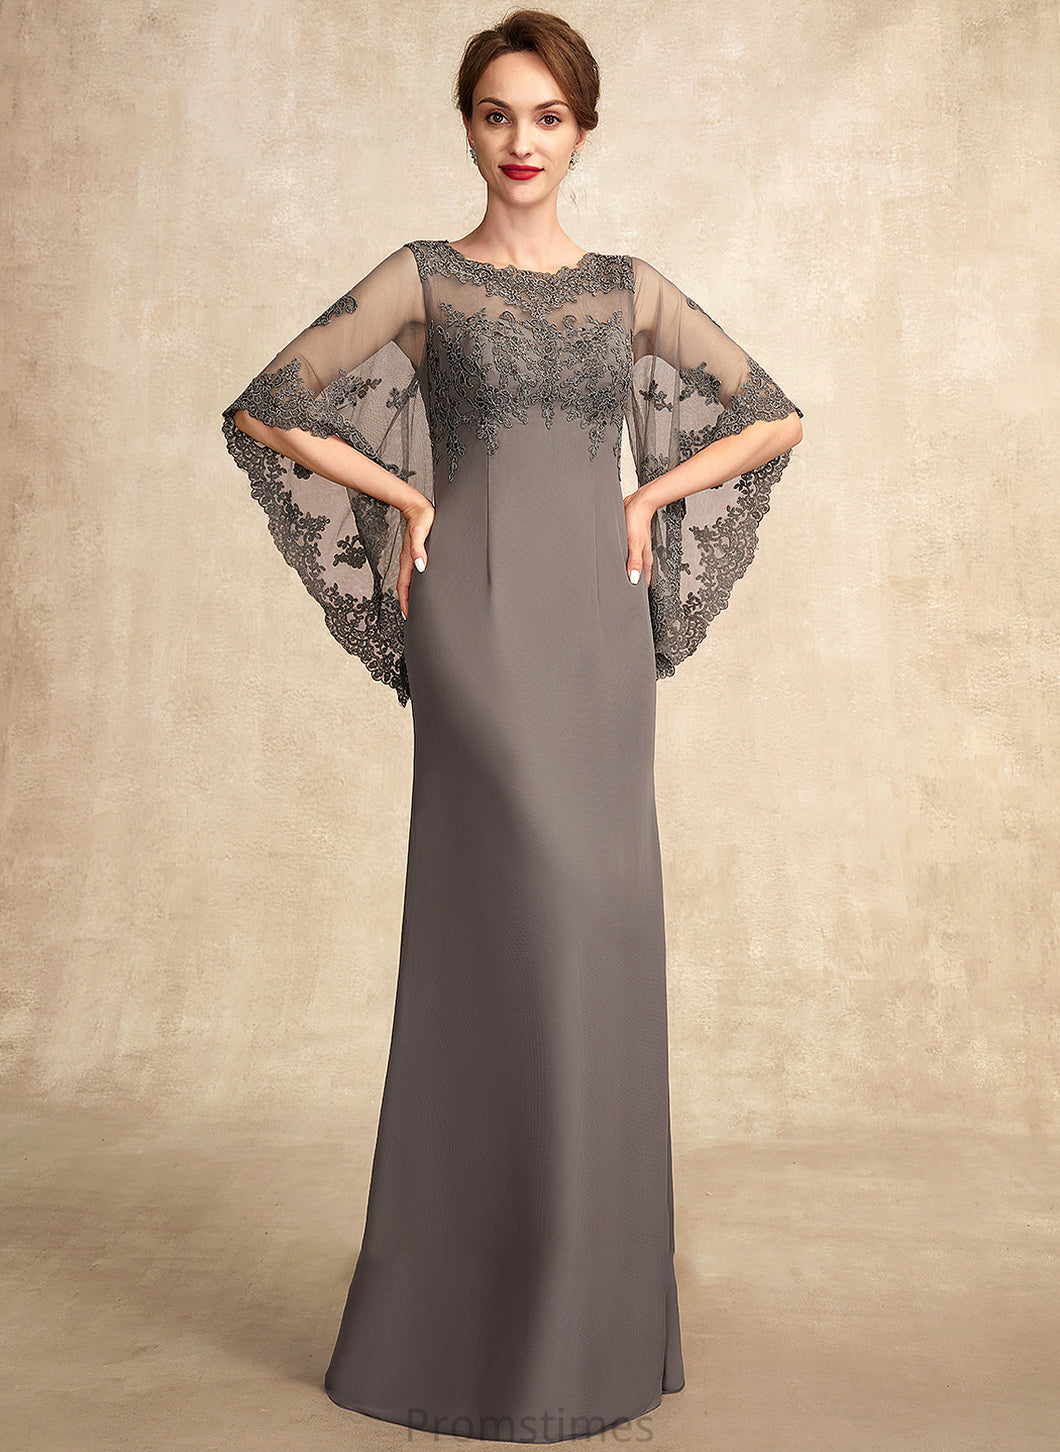 Dress Mother Scoop Mother of the Bride Dresses the Sheath/Column Neck Chiffon Lace Jayleen Floor-Length of Bride